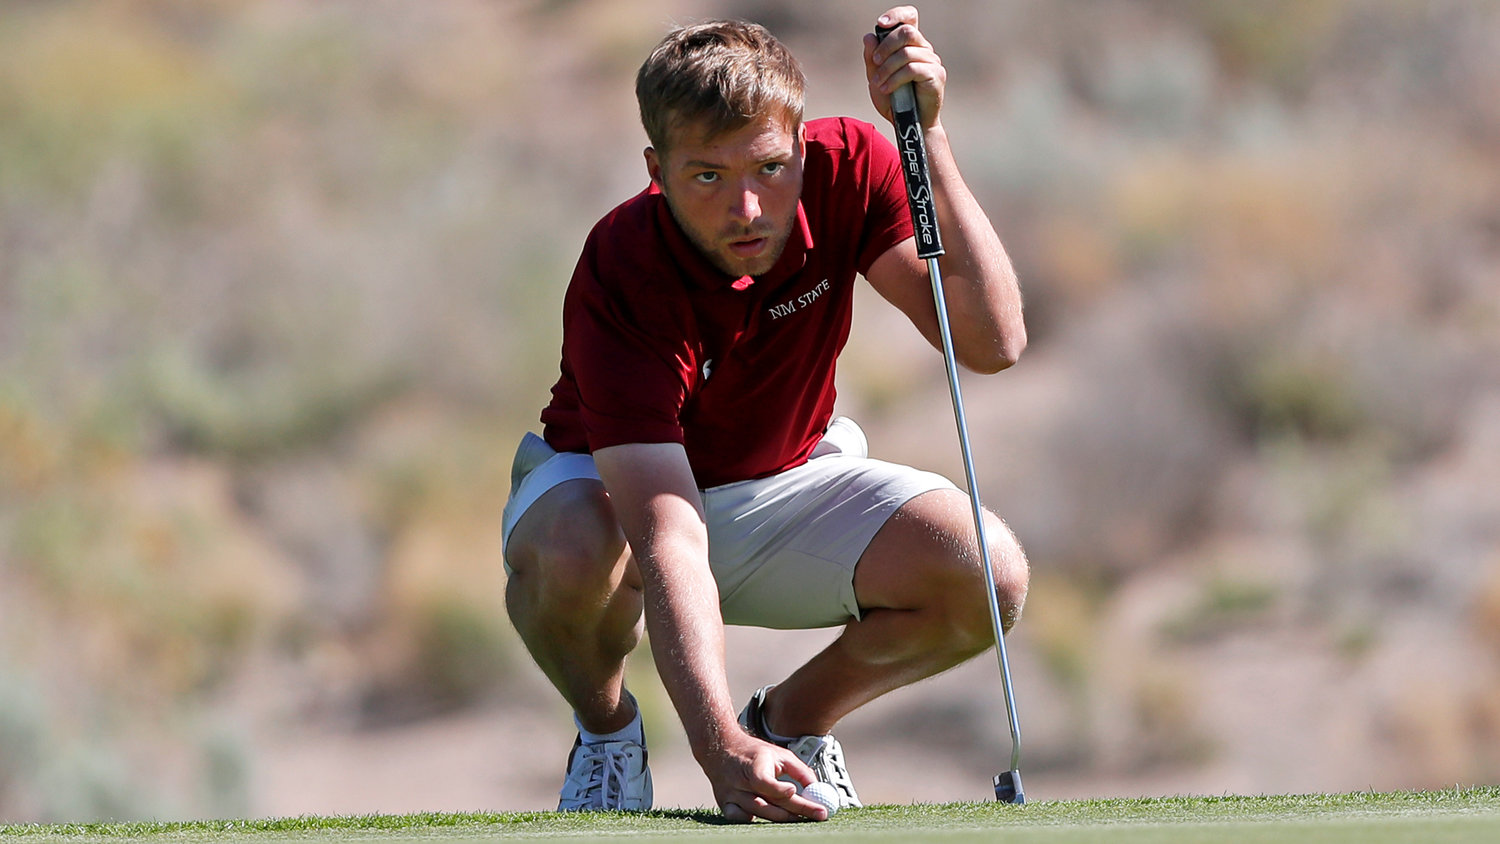 Sophomore Garrison Smith was the Aggies top golfer during the first day of action at the NCAA Southwest Region in Albuquerque.